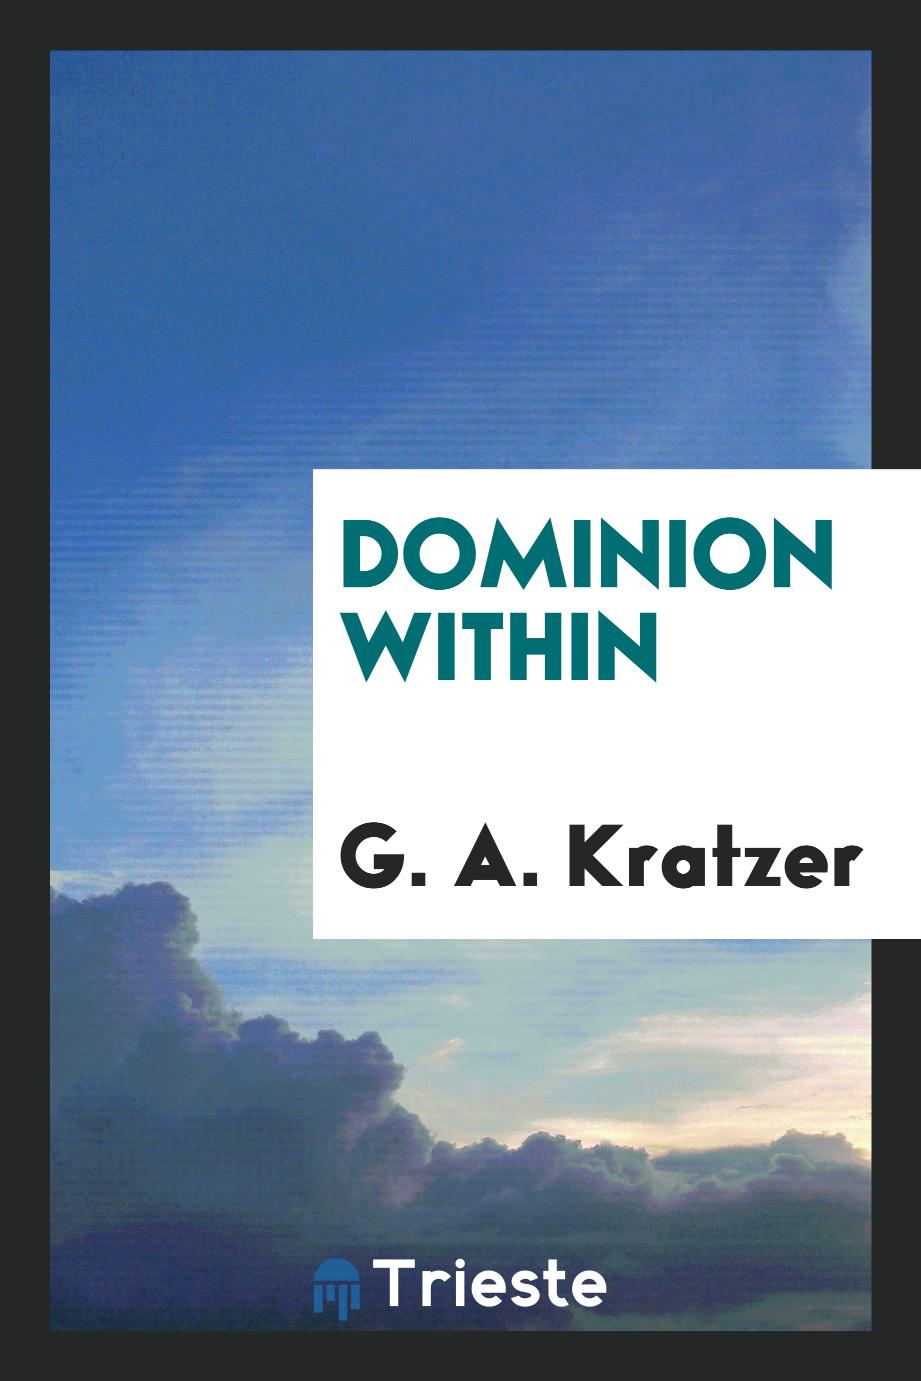 Dominion within